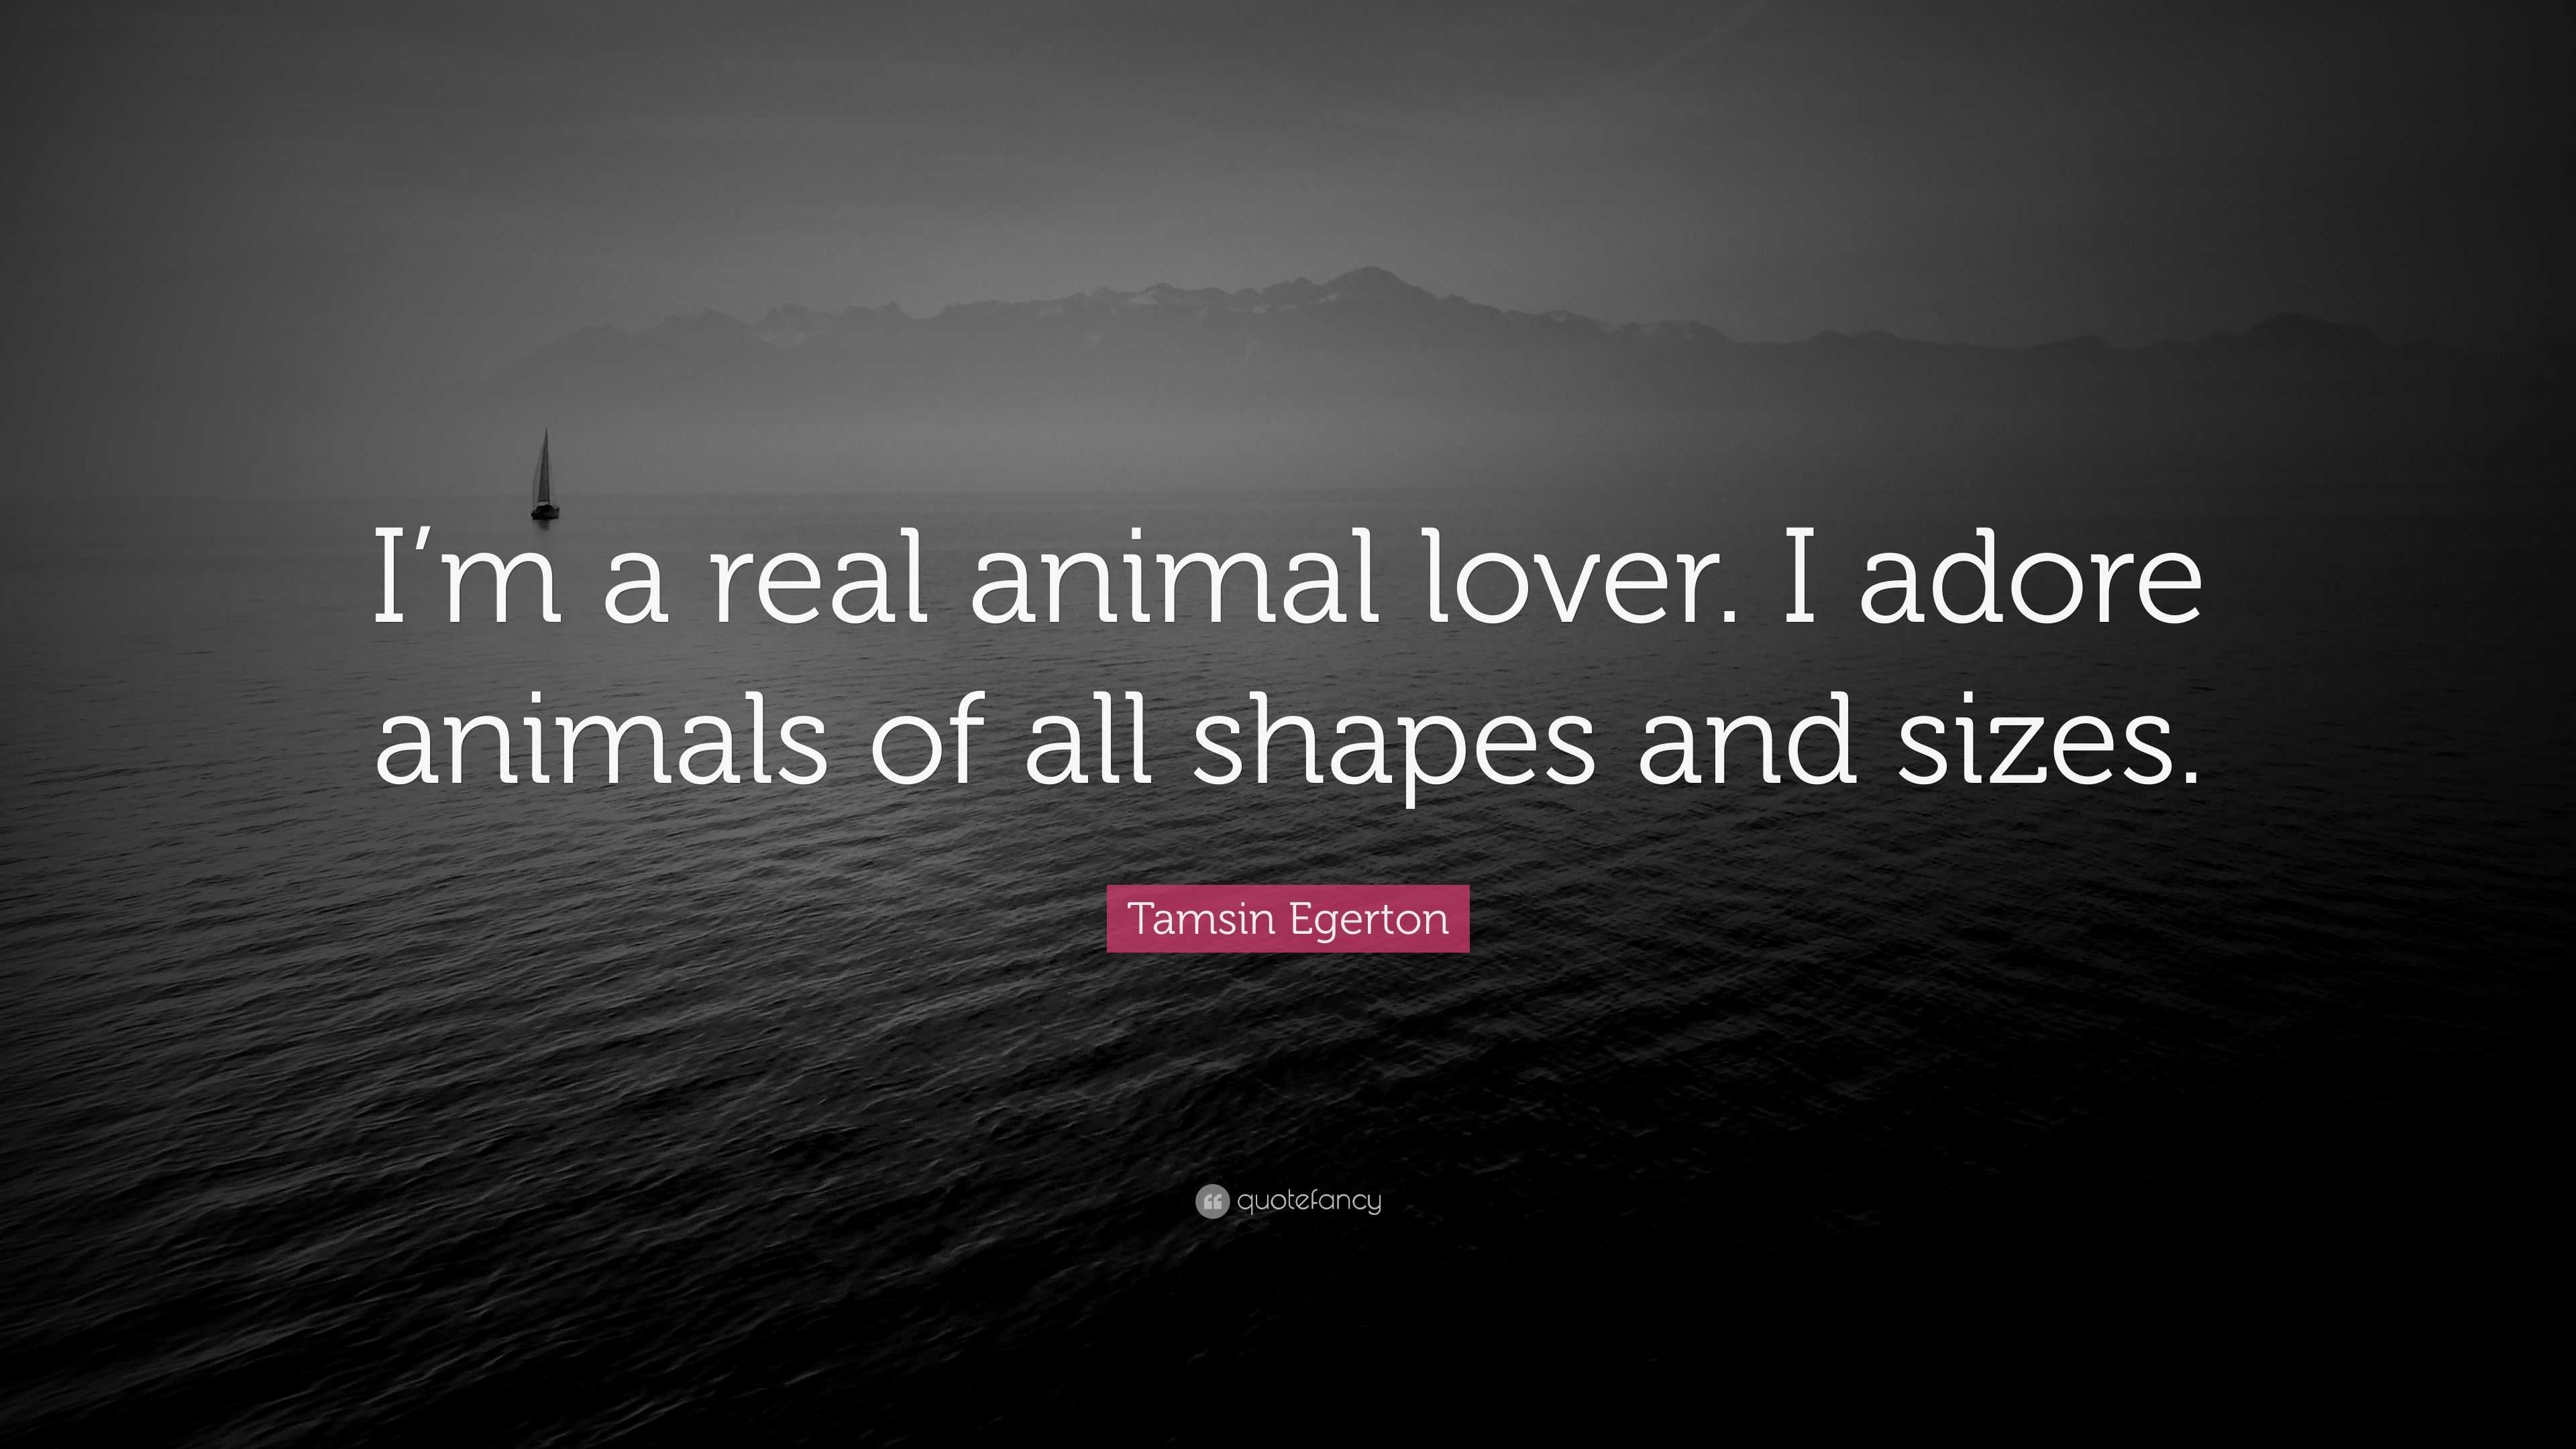 Tamsin Egerton Quote: “I'm a real animal lover. I adore animals of all  shapes and